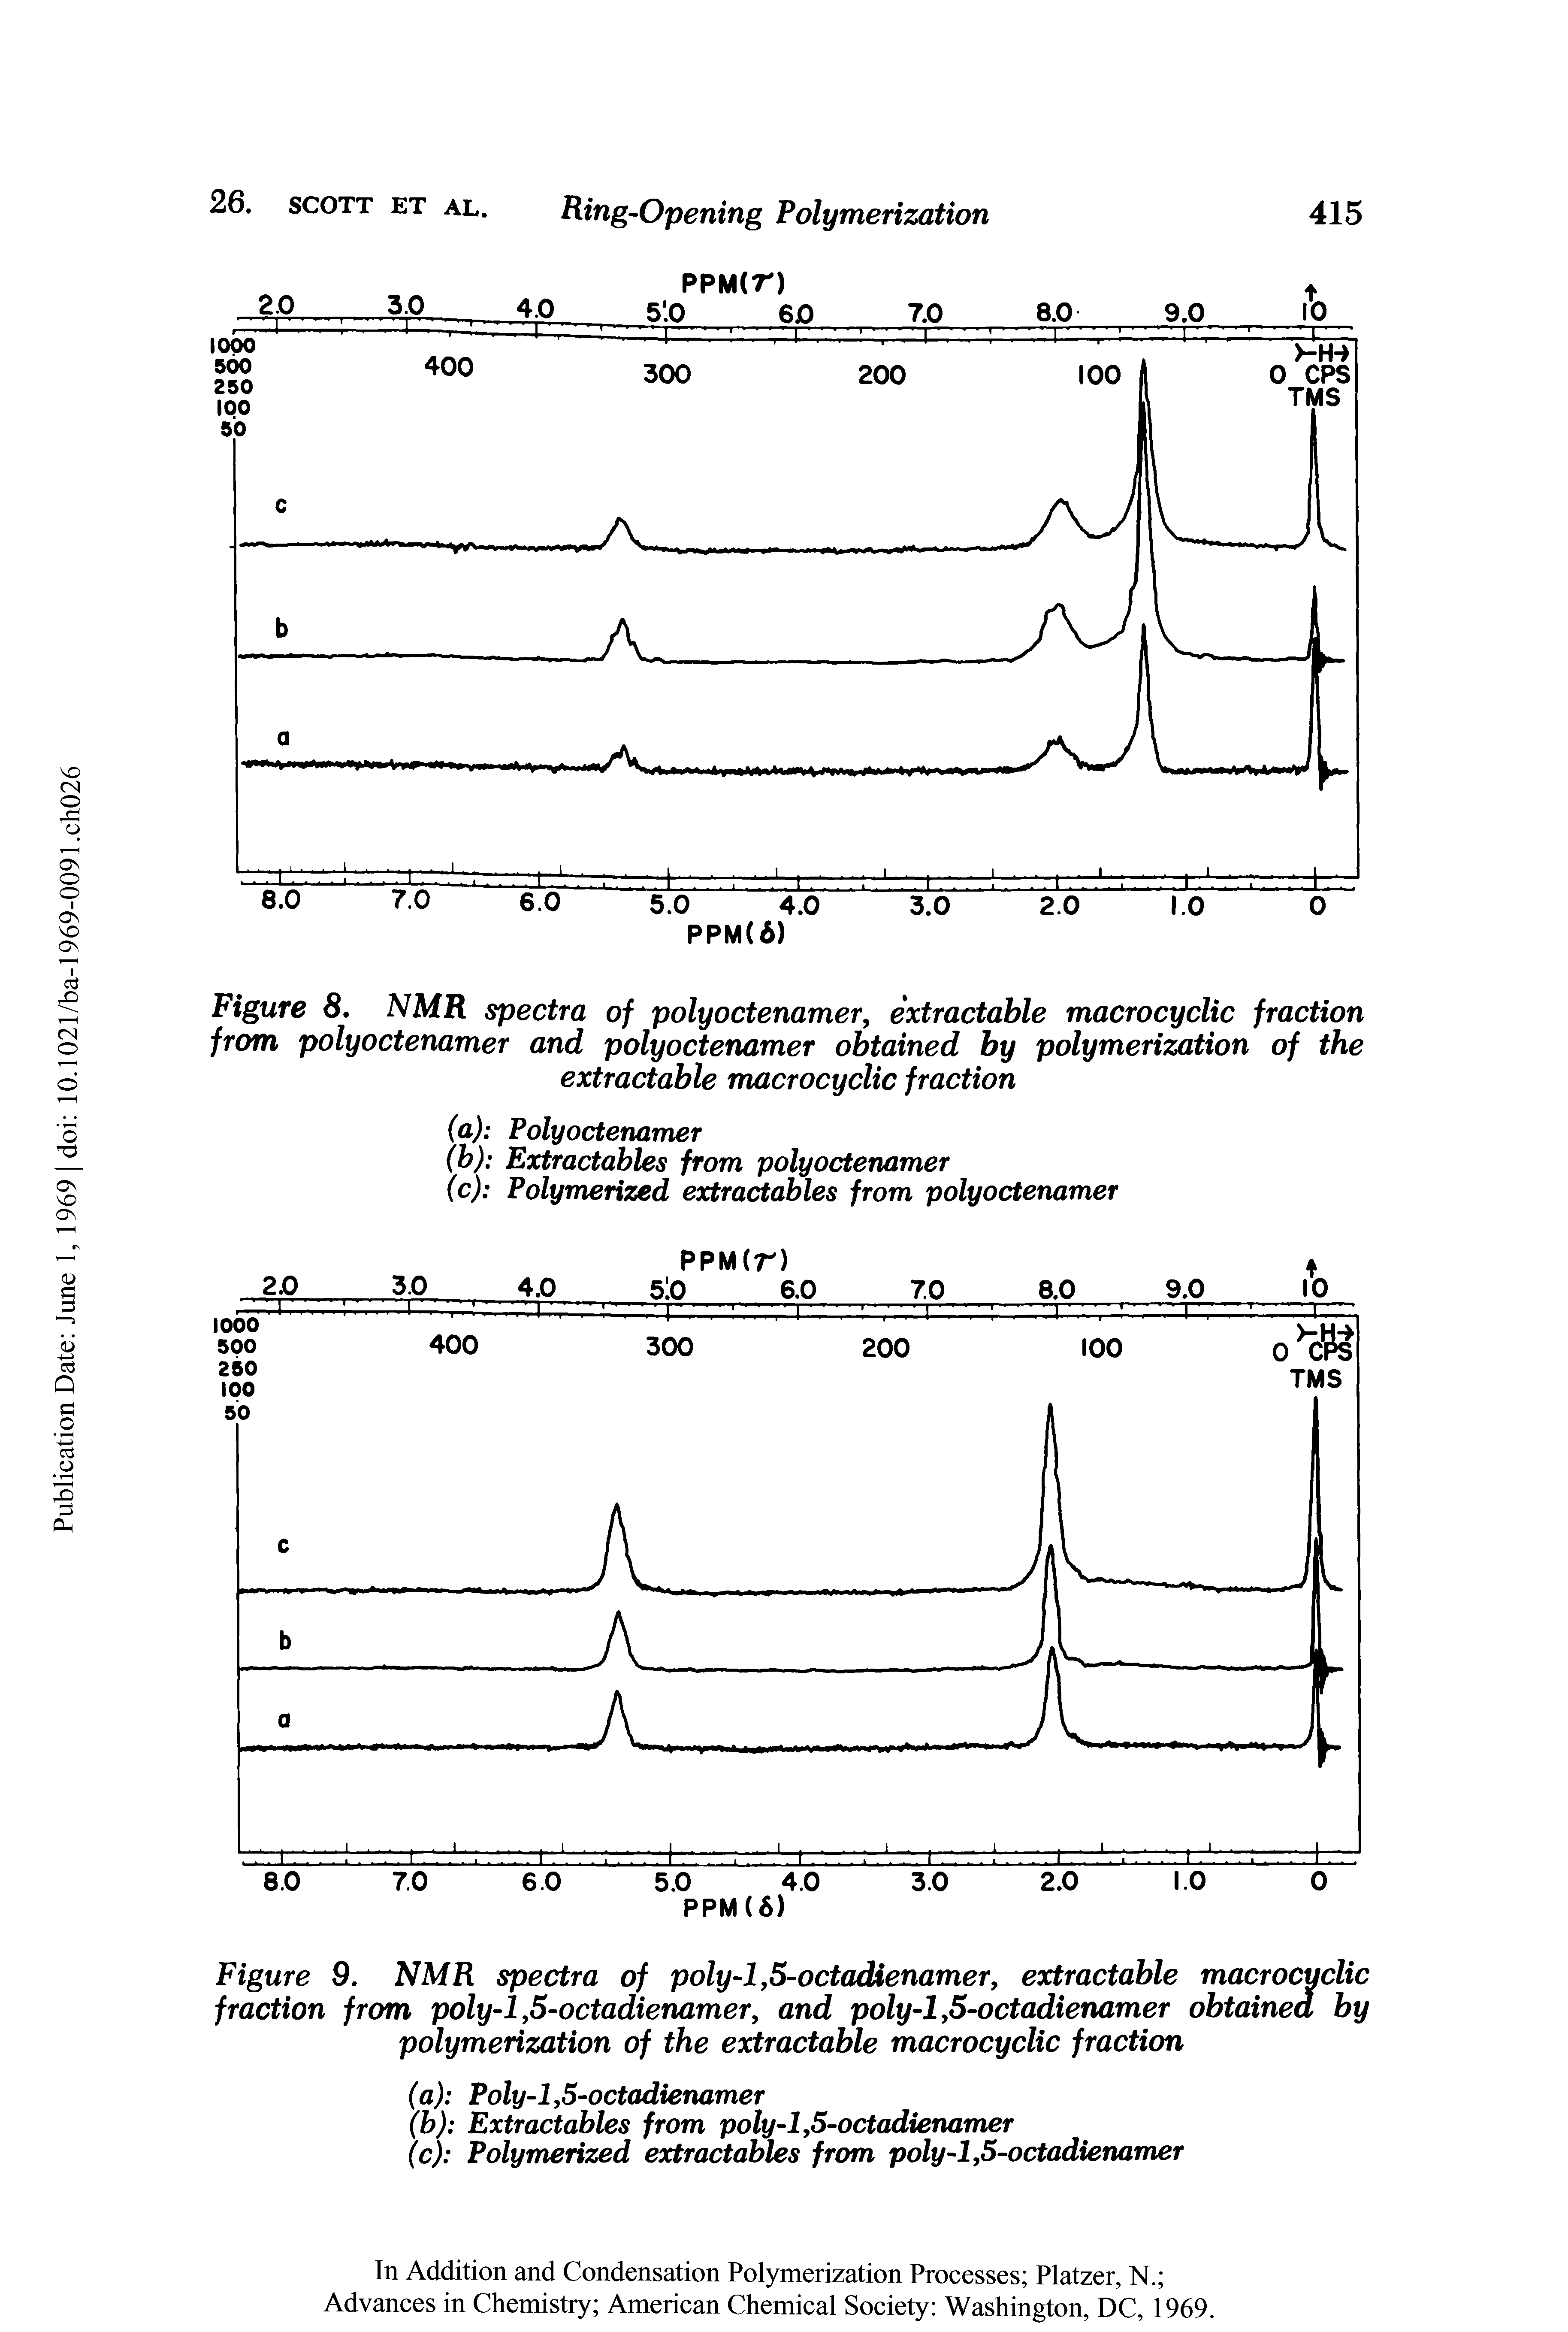 Figure 8. NMR spectra of polyoctenamer, extractable macrocyclic fraction from polyoctenamer and polyoctenamer obtained by polymerization of the extractable macrocyclic fraction...